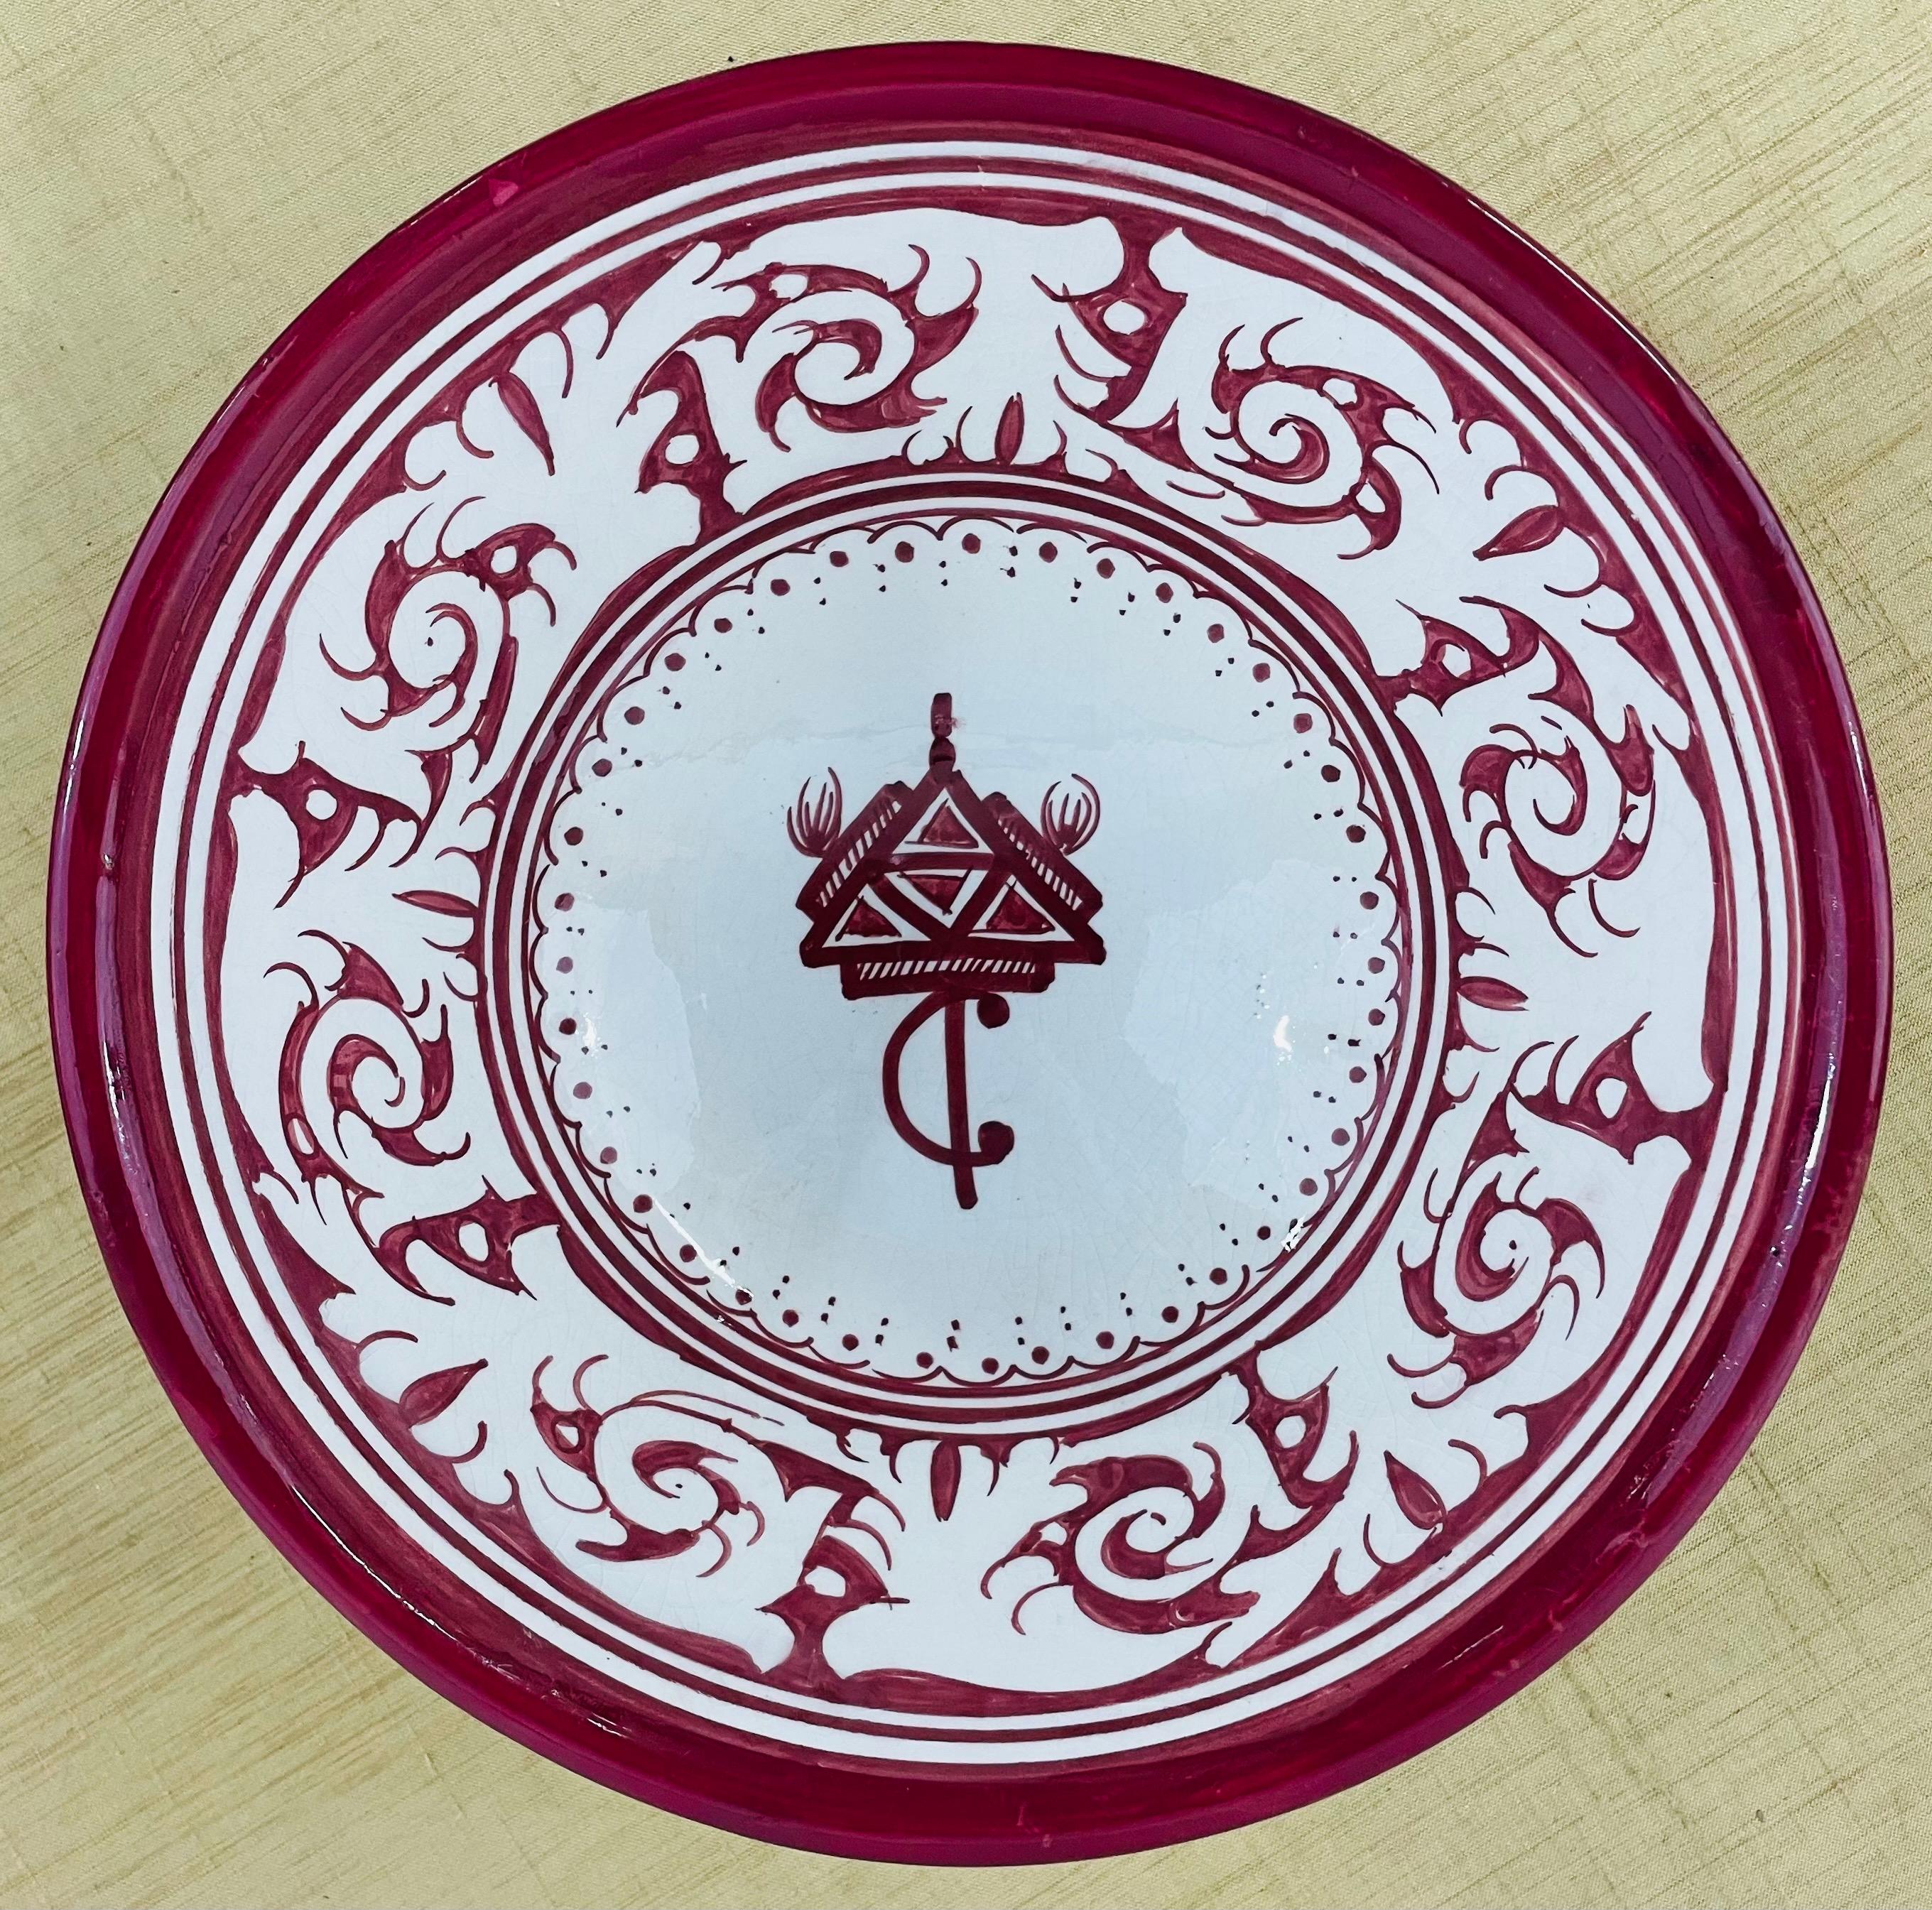 A set of 4 large vintage tribal Moroccan hand painted ceramic bowls. In a white and burgundy tone, each bowl features beautiful floral motifs and a triangle emblem of the Berber tribes of Morocco. 

Dimensions: 10.5